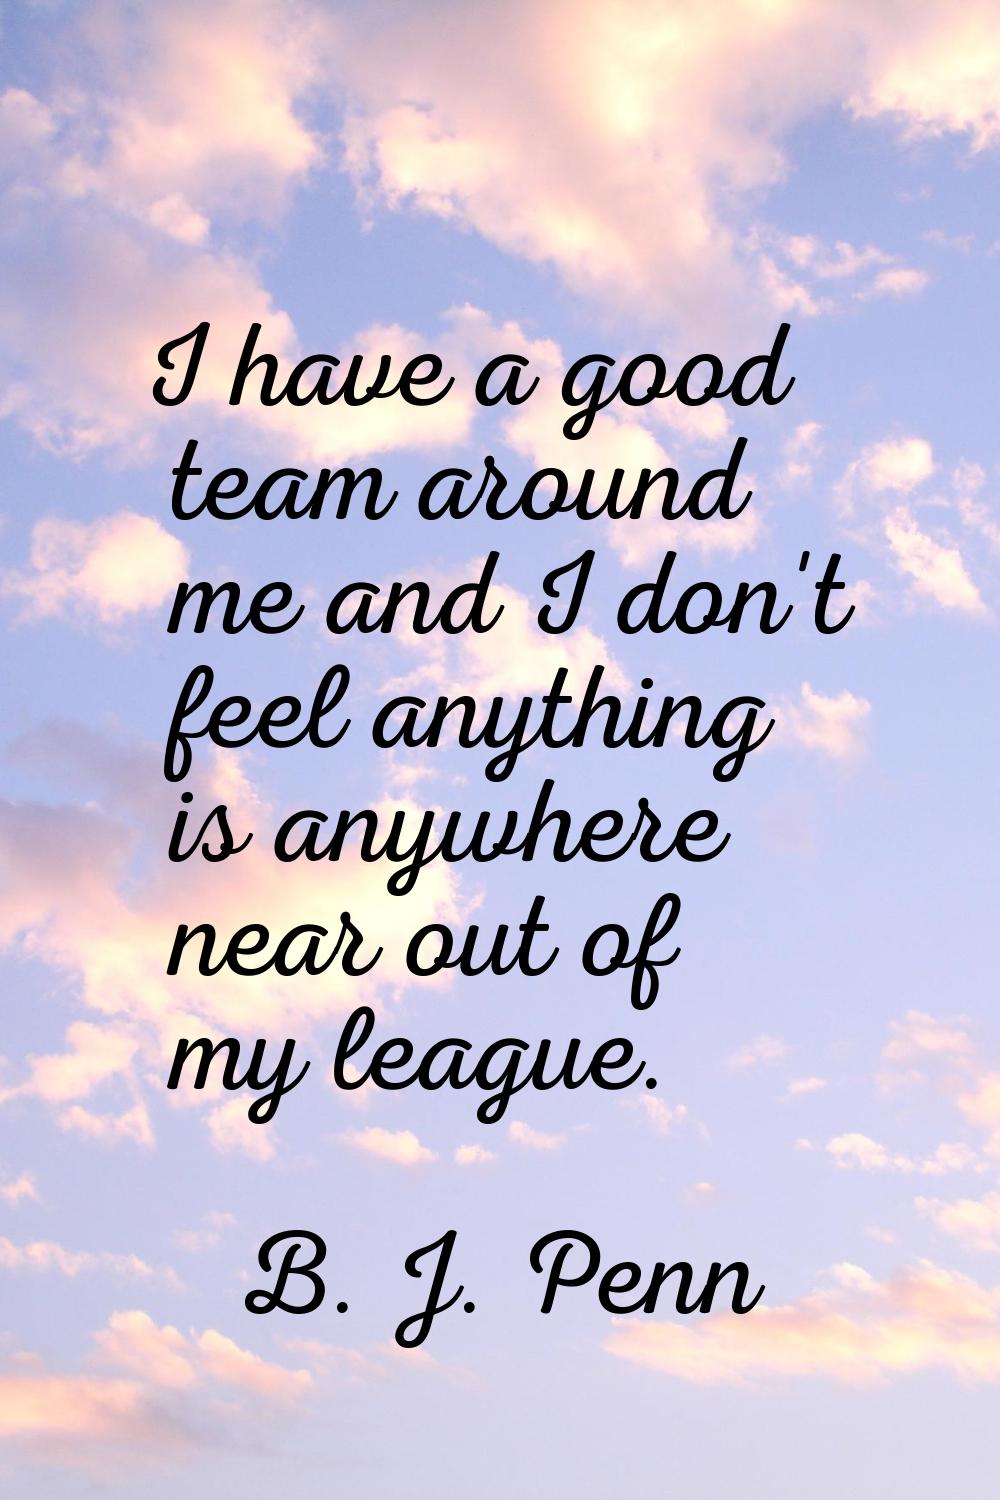 I have a good team around me and I don't feel anything is anywhere near out of my league.